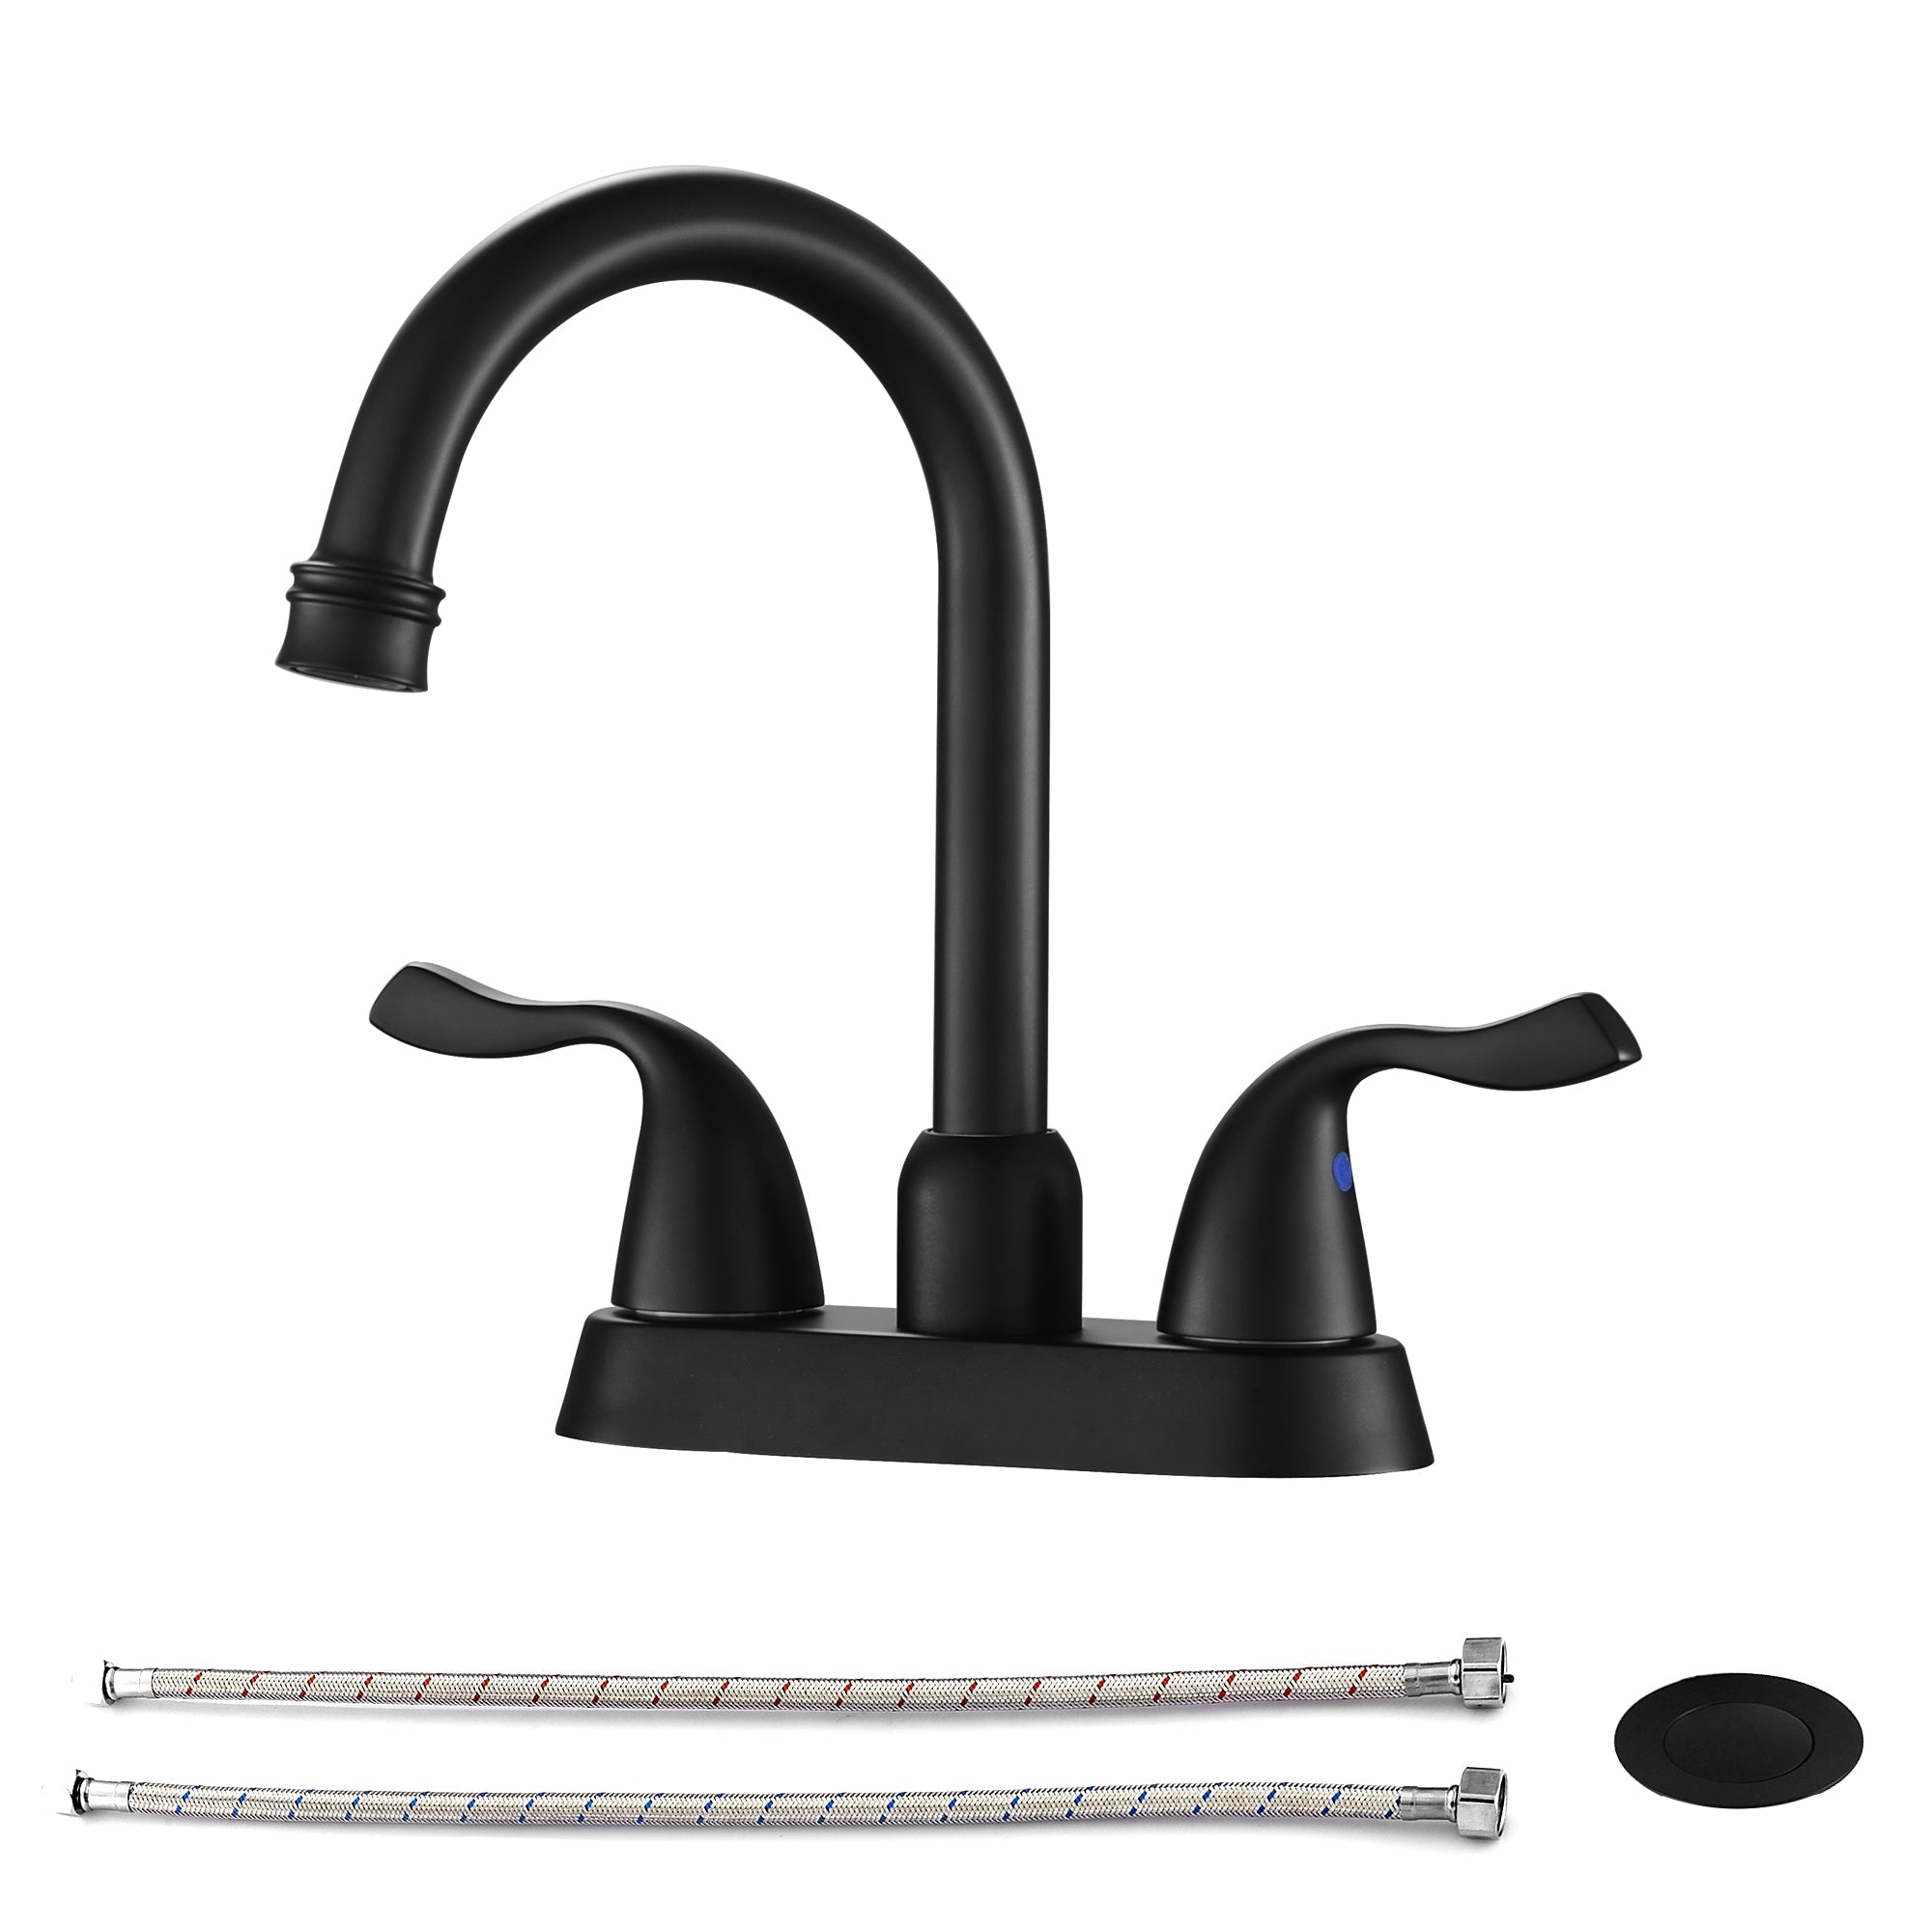 Bathroom Sink Faucet 2 Handle Modern Commercial Vessel Sink Faucet | Bathroom, Bathroom Faucets, Bathroom Sink Faucet, Faucet, Handle Faucet, Long Inventory Age, Sink Faucet, Tap, Wash Hand, Washroom | Lordear